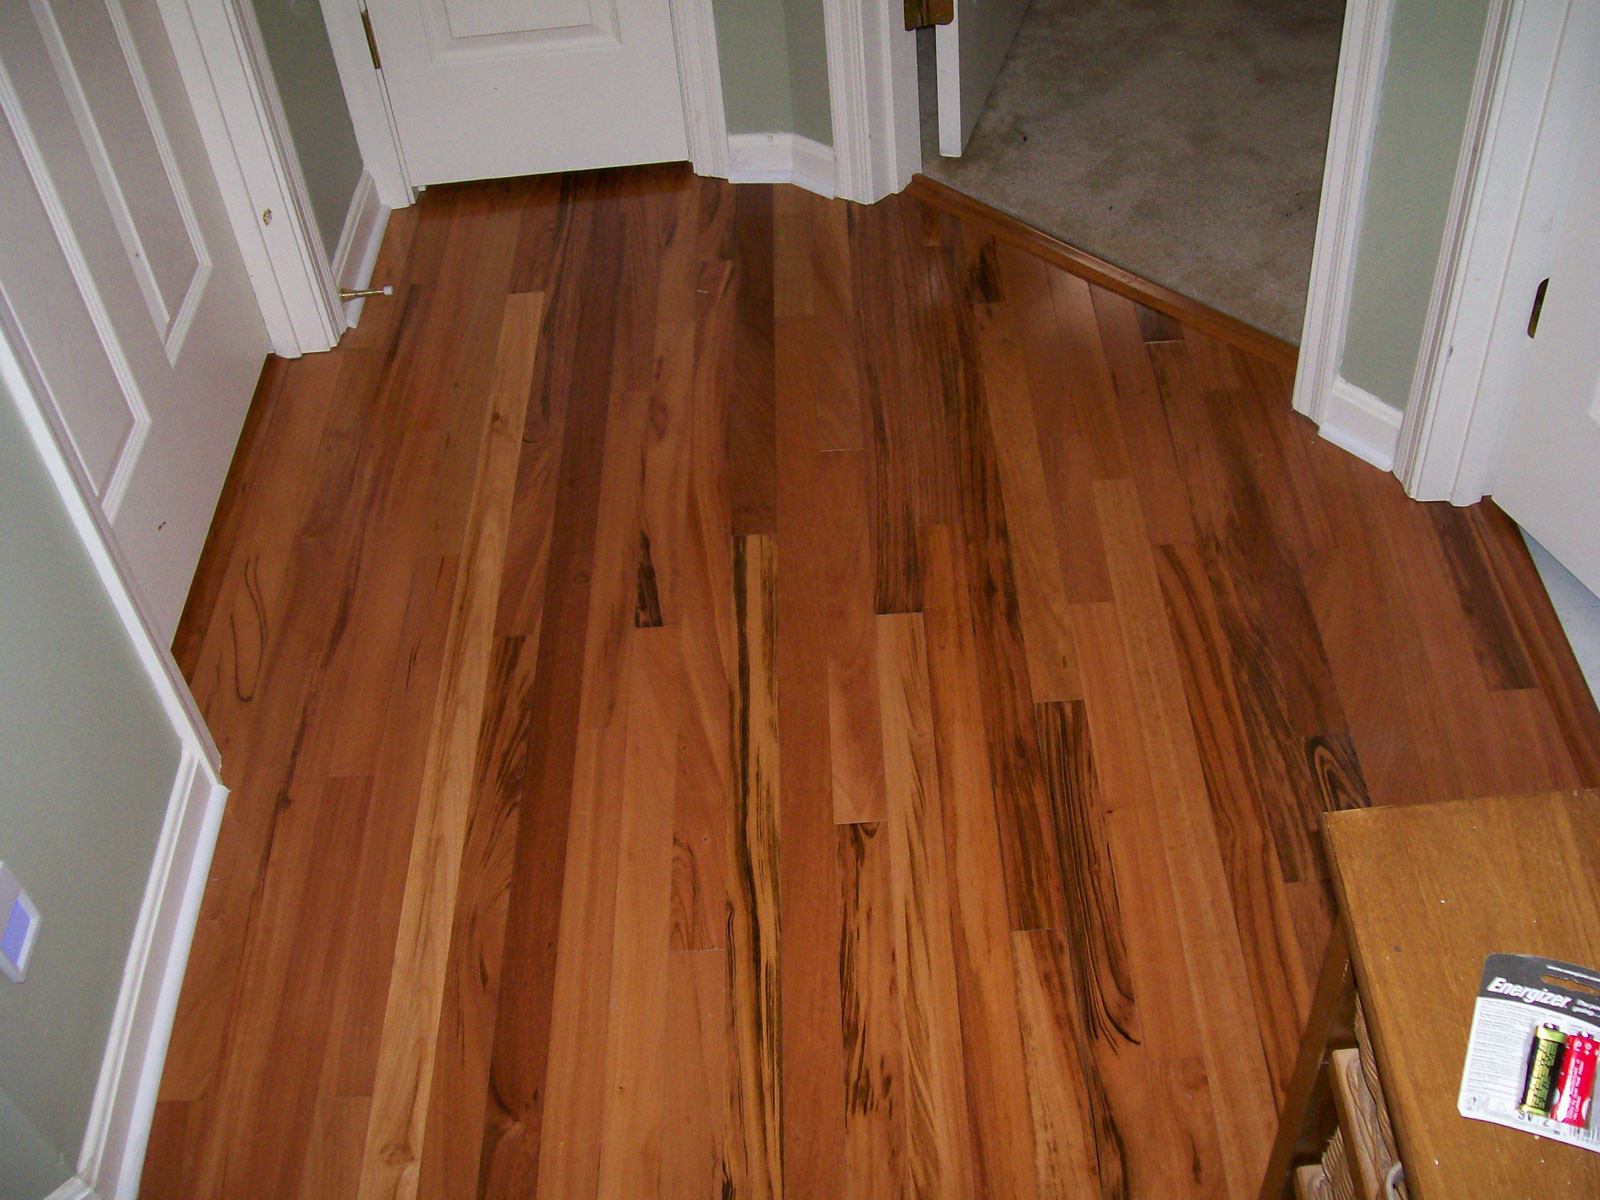 18 Fabulous Costco Hardwood Flooring Installation Cost 2024 free download costco hardwood flooring installation cost of most durable laminate flooring floor prices pic lowes hardwood vs intended for home depot laminate flooring installation how to install on concr